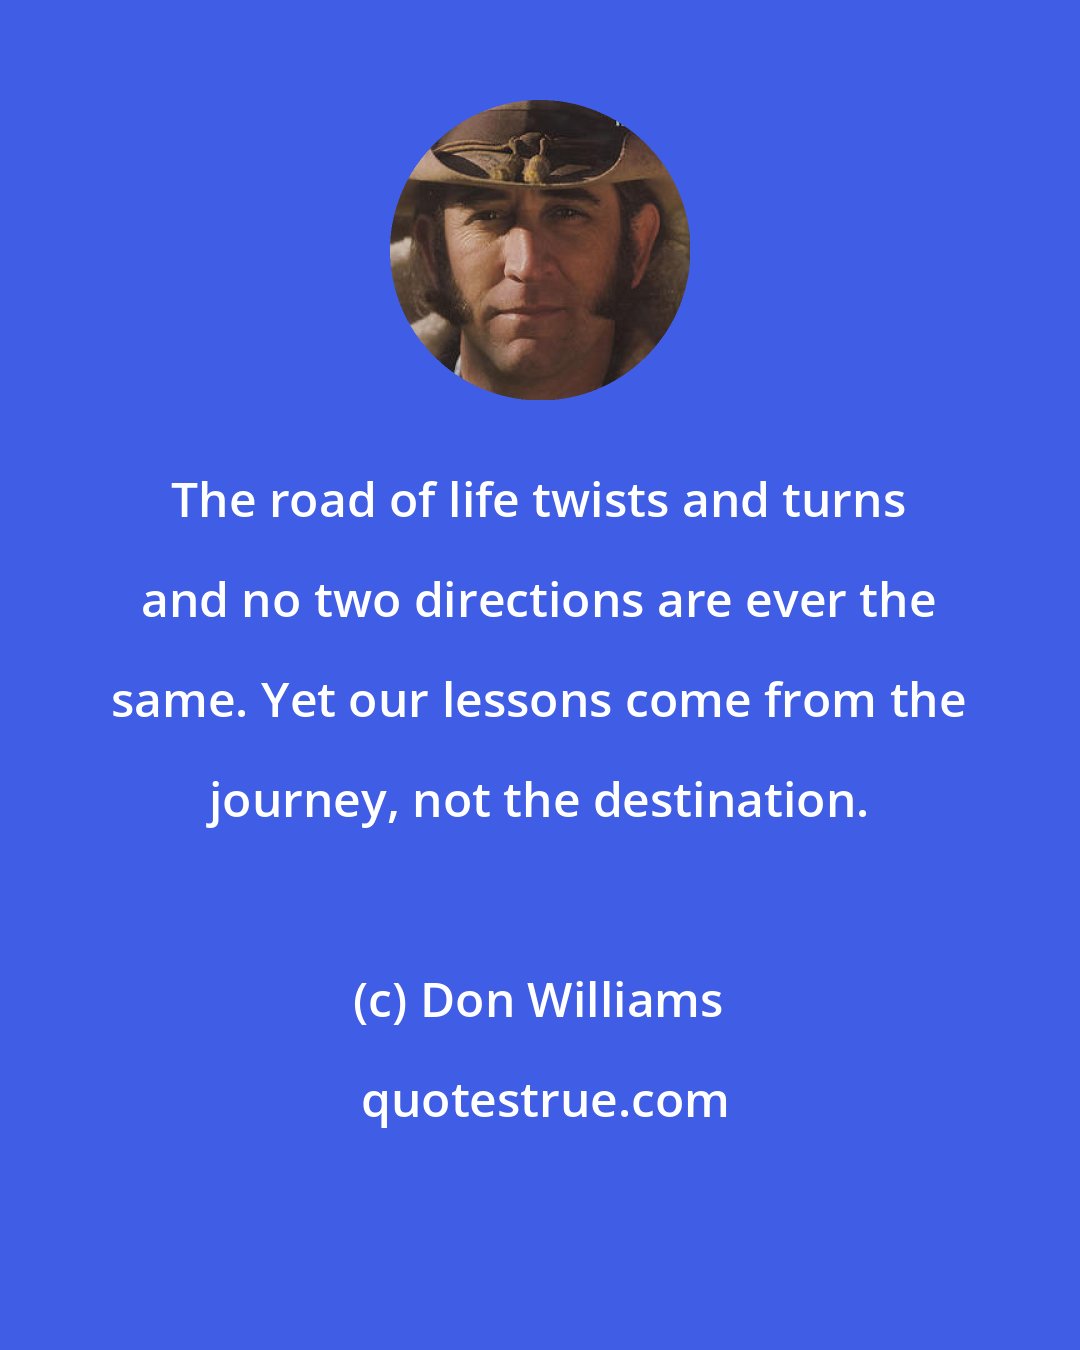 Don Williams: The road of life twists and turns and no two directions are ever the same. Yet our lessons come from the journey, not the destination.